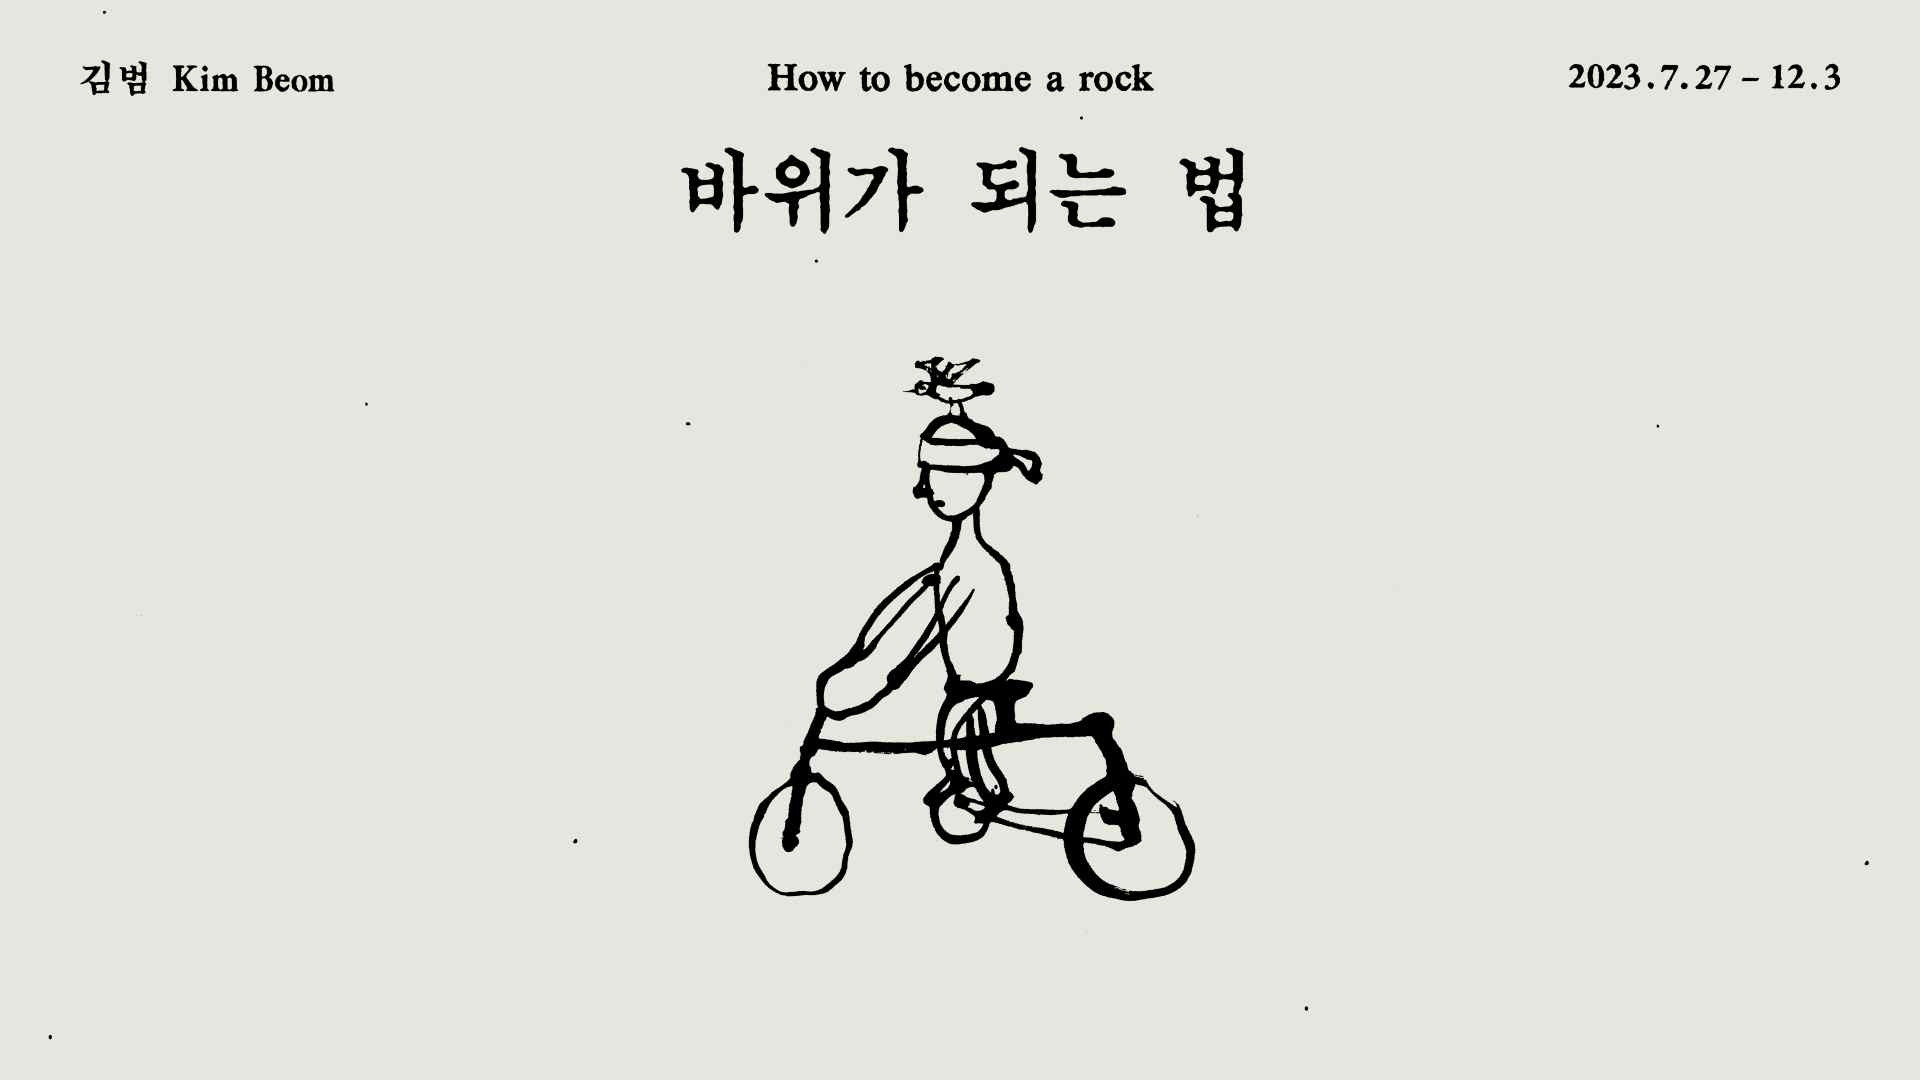 Beom Kim: How to become a rock